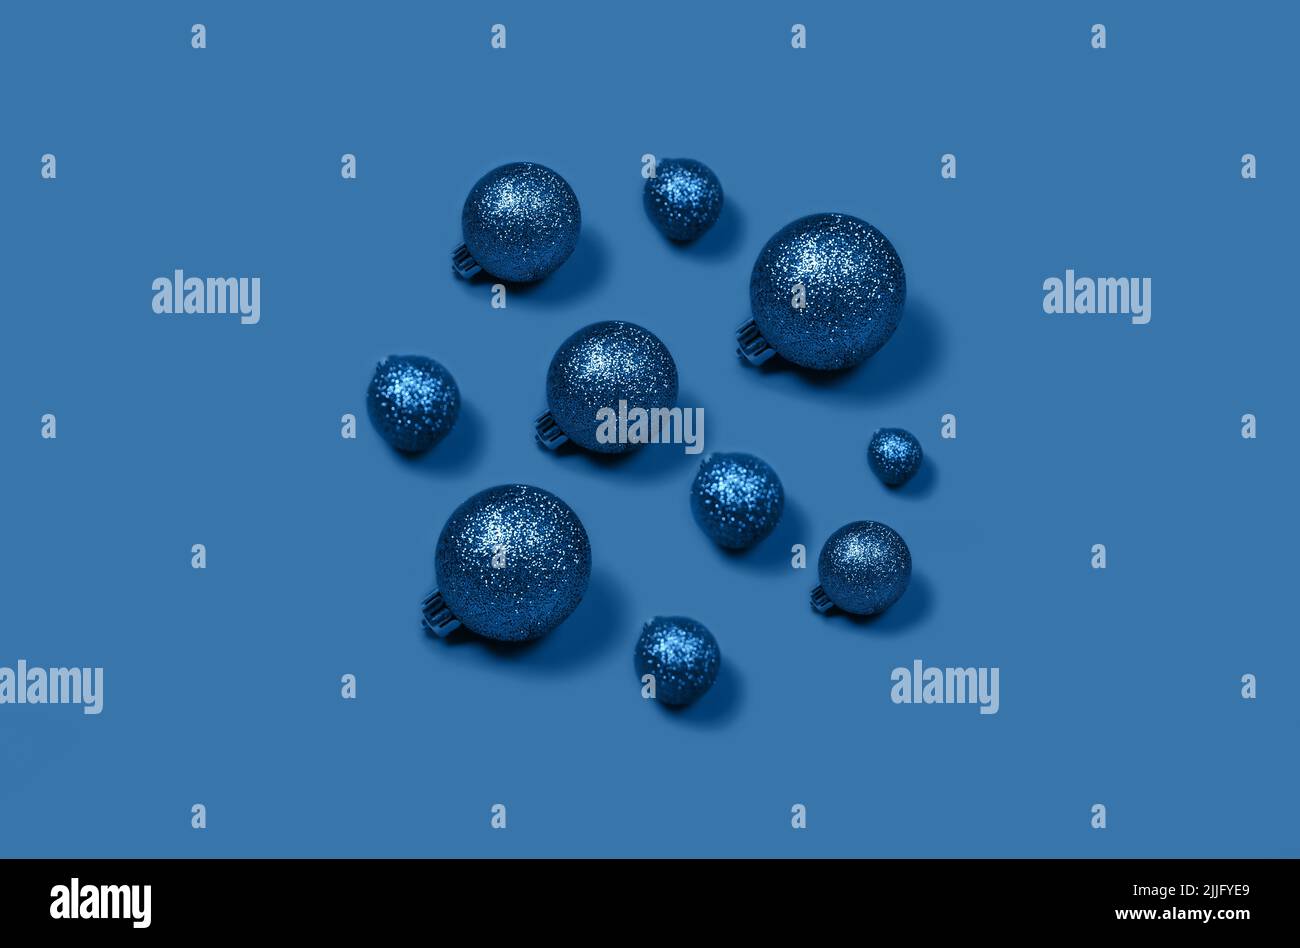 Volume Christmas composition of blue Christmas balls laid out in the form of circle on bright background. Stock Photo